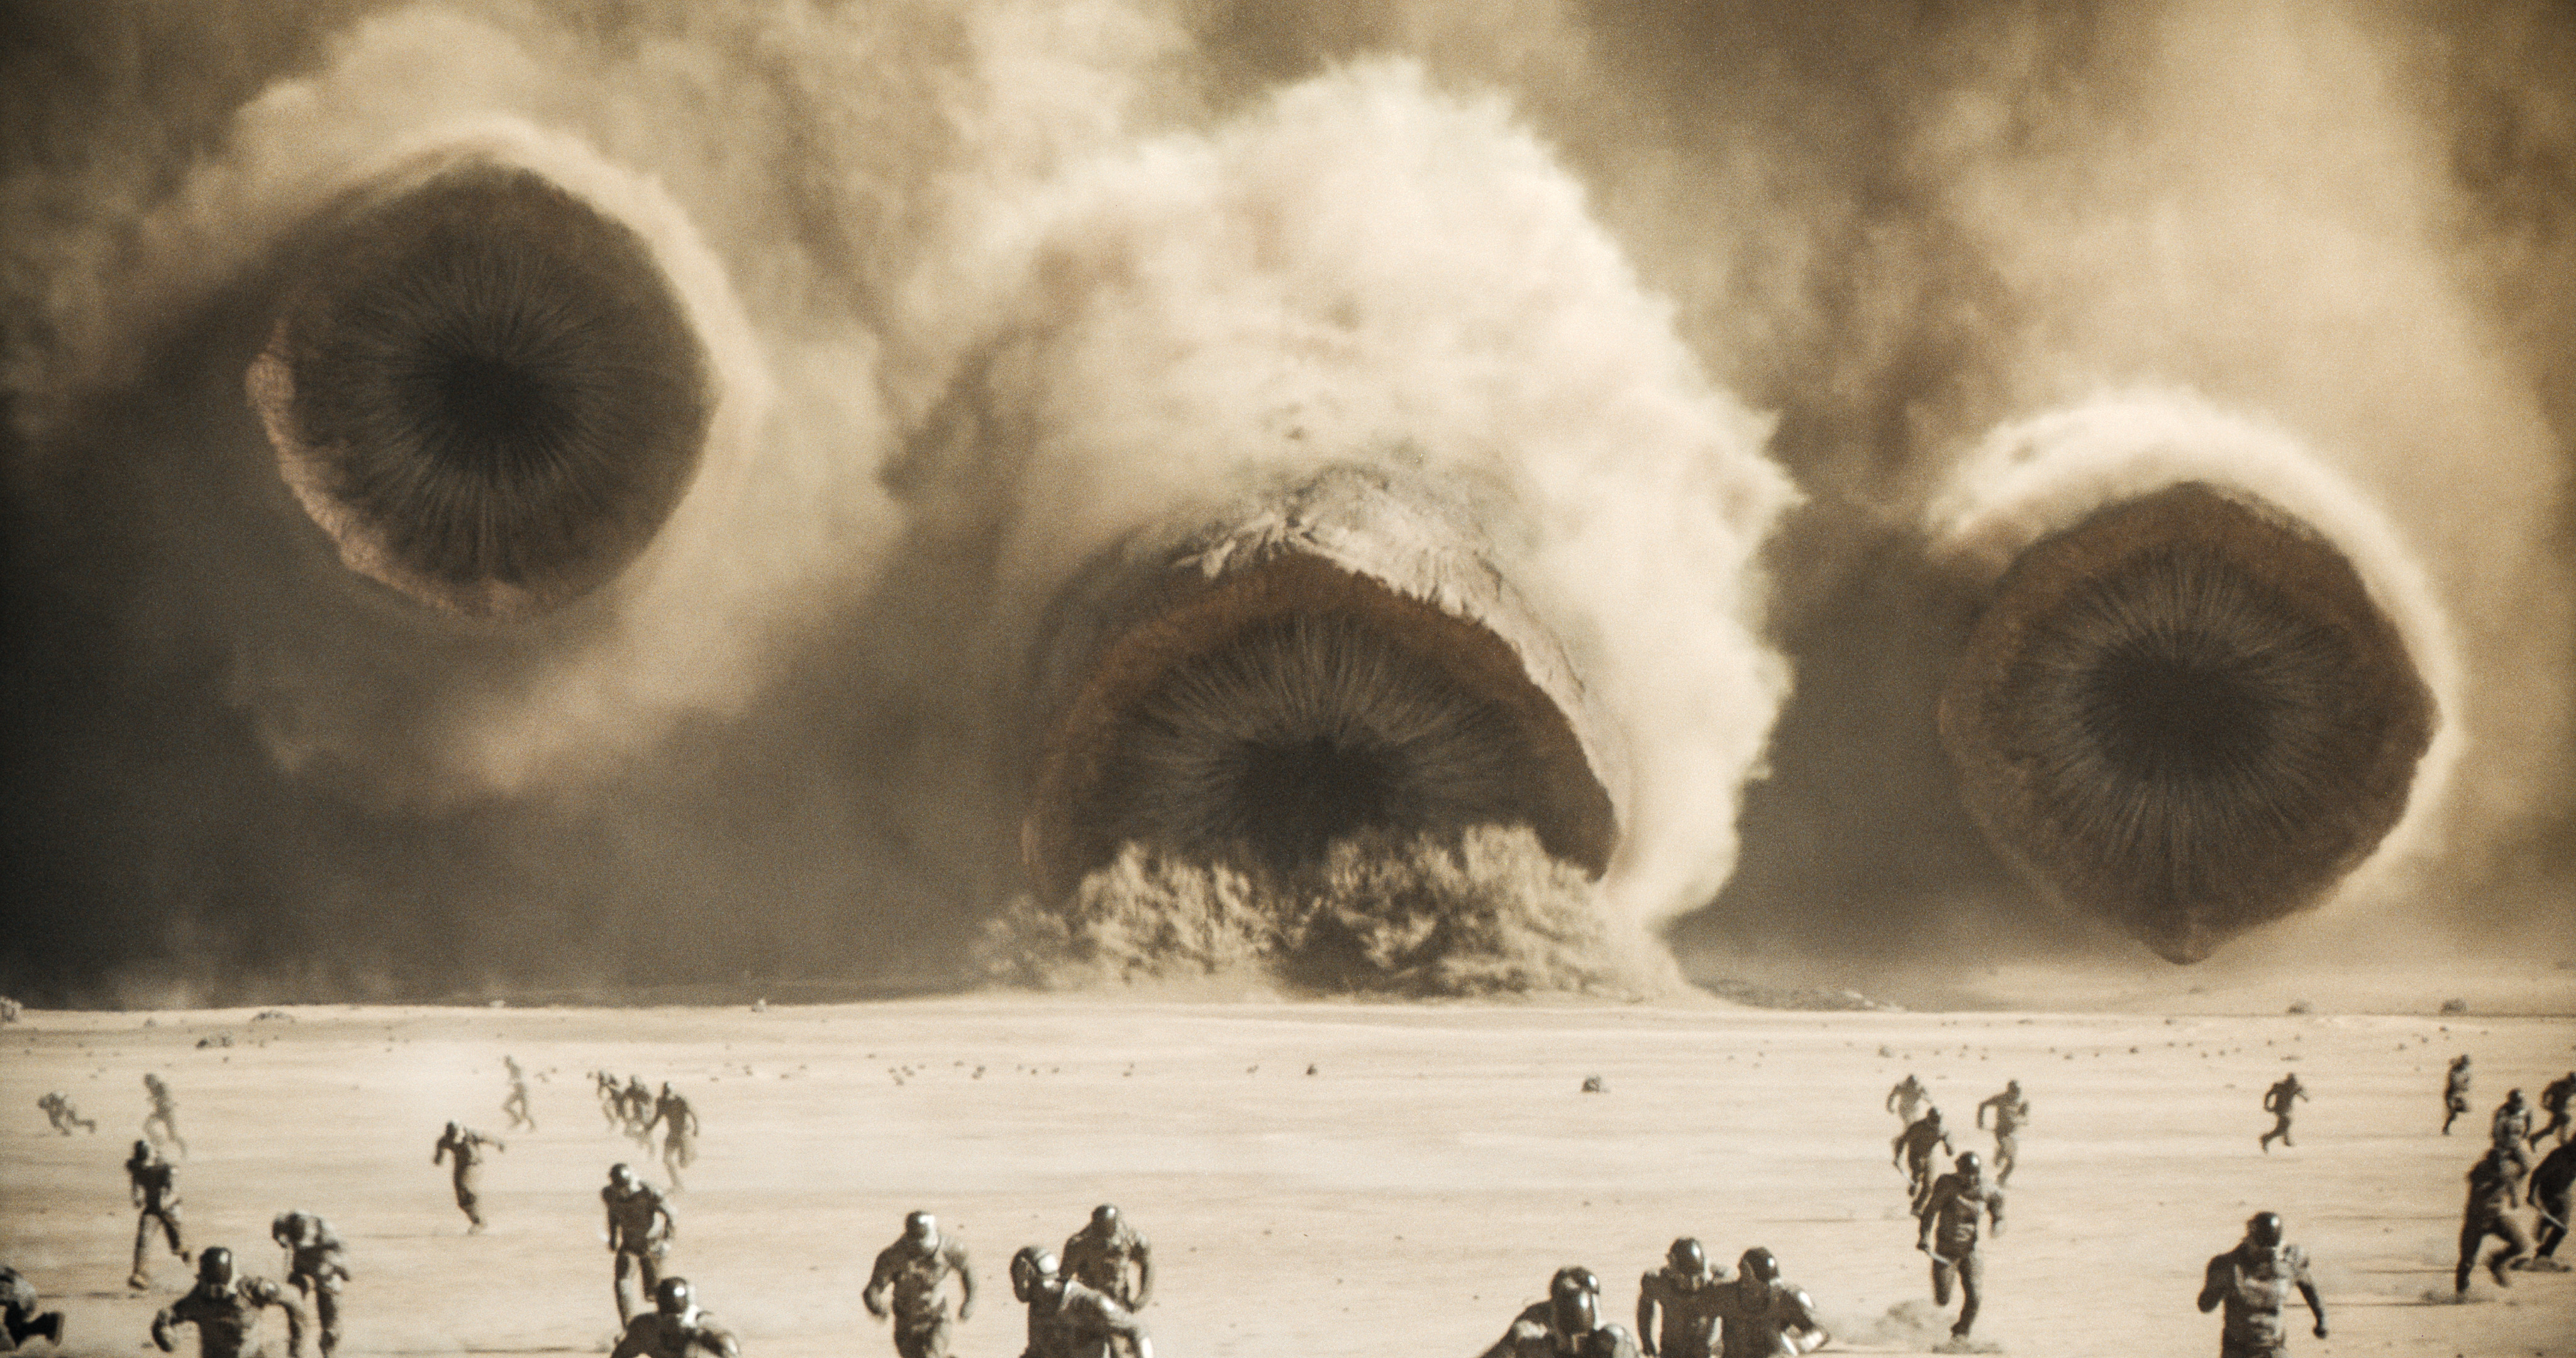 People run from massive sandworms in a still from Dune. 